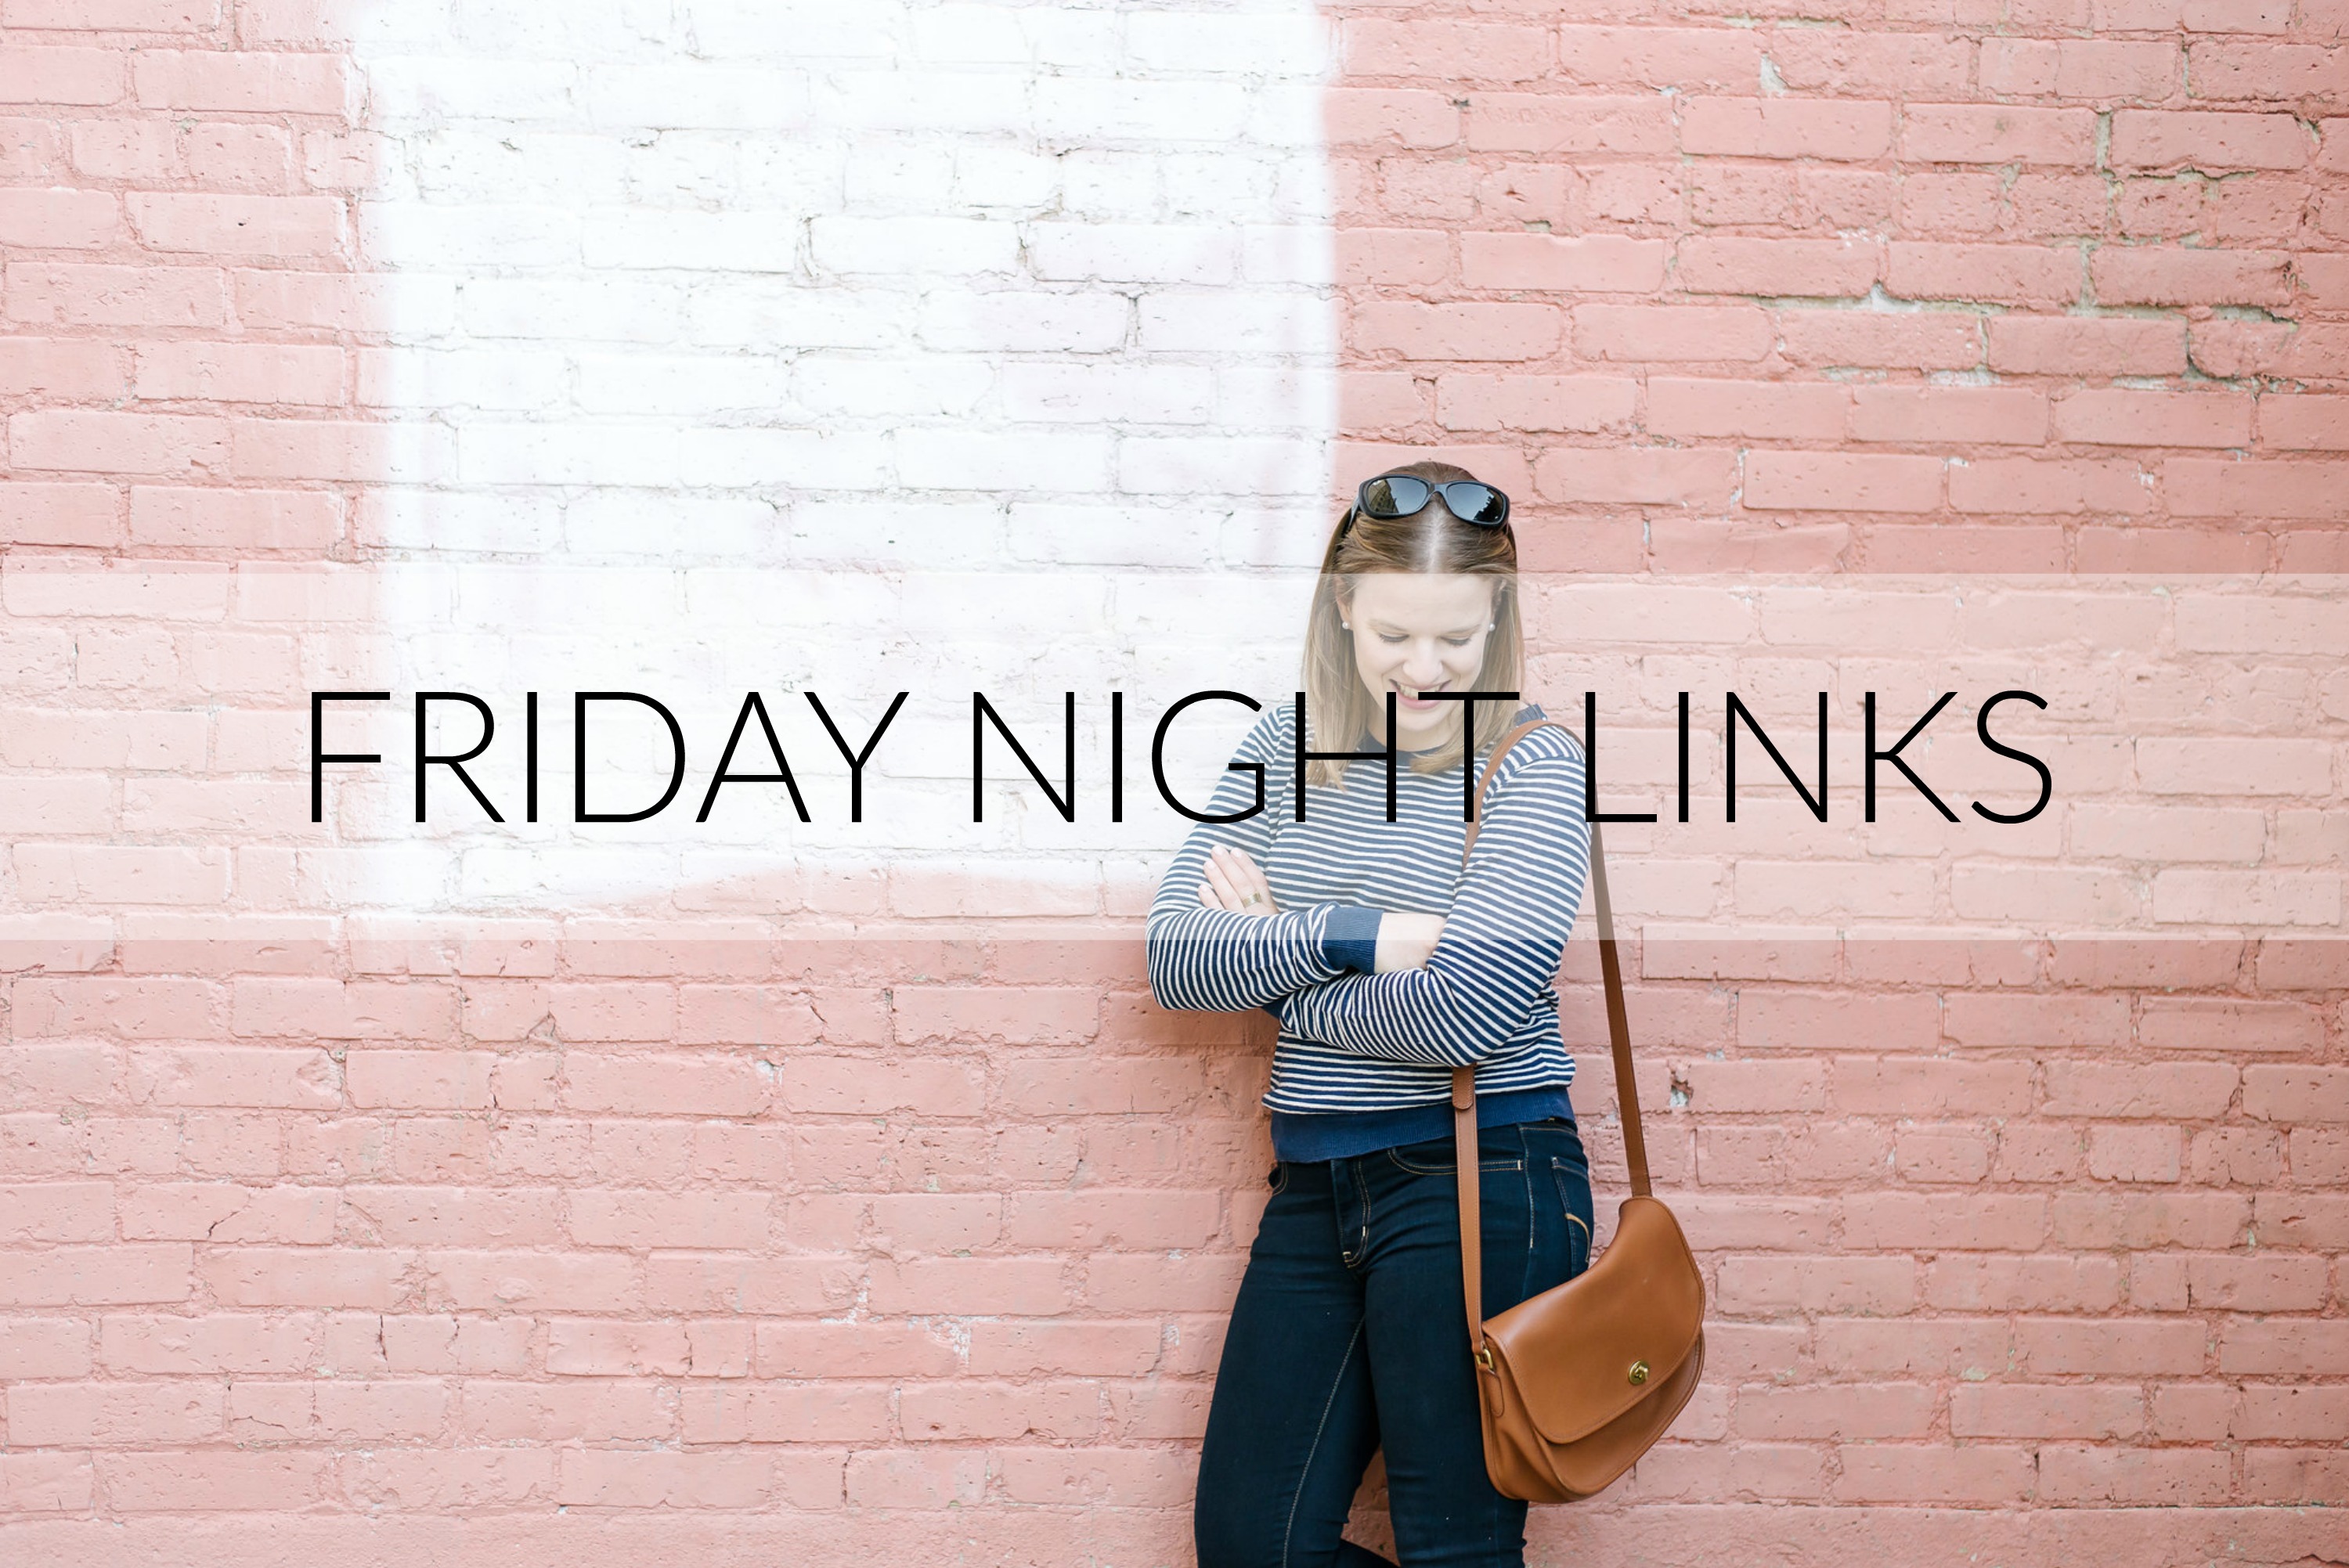 feel-good videos | Friday Night Links | Something Good | A Style Blog on a Budget